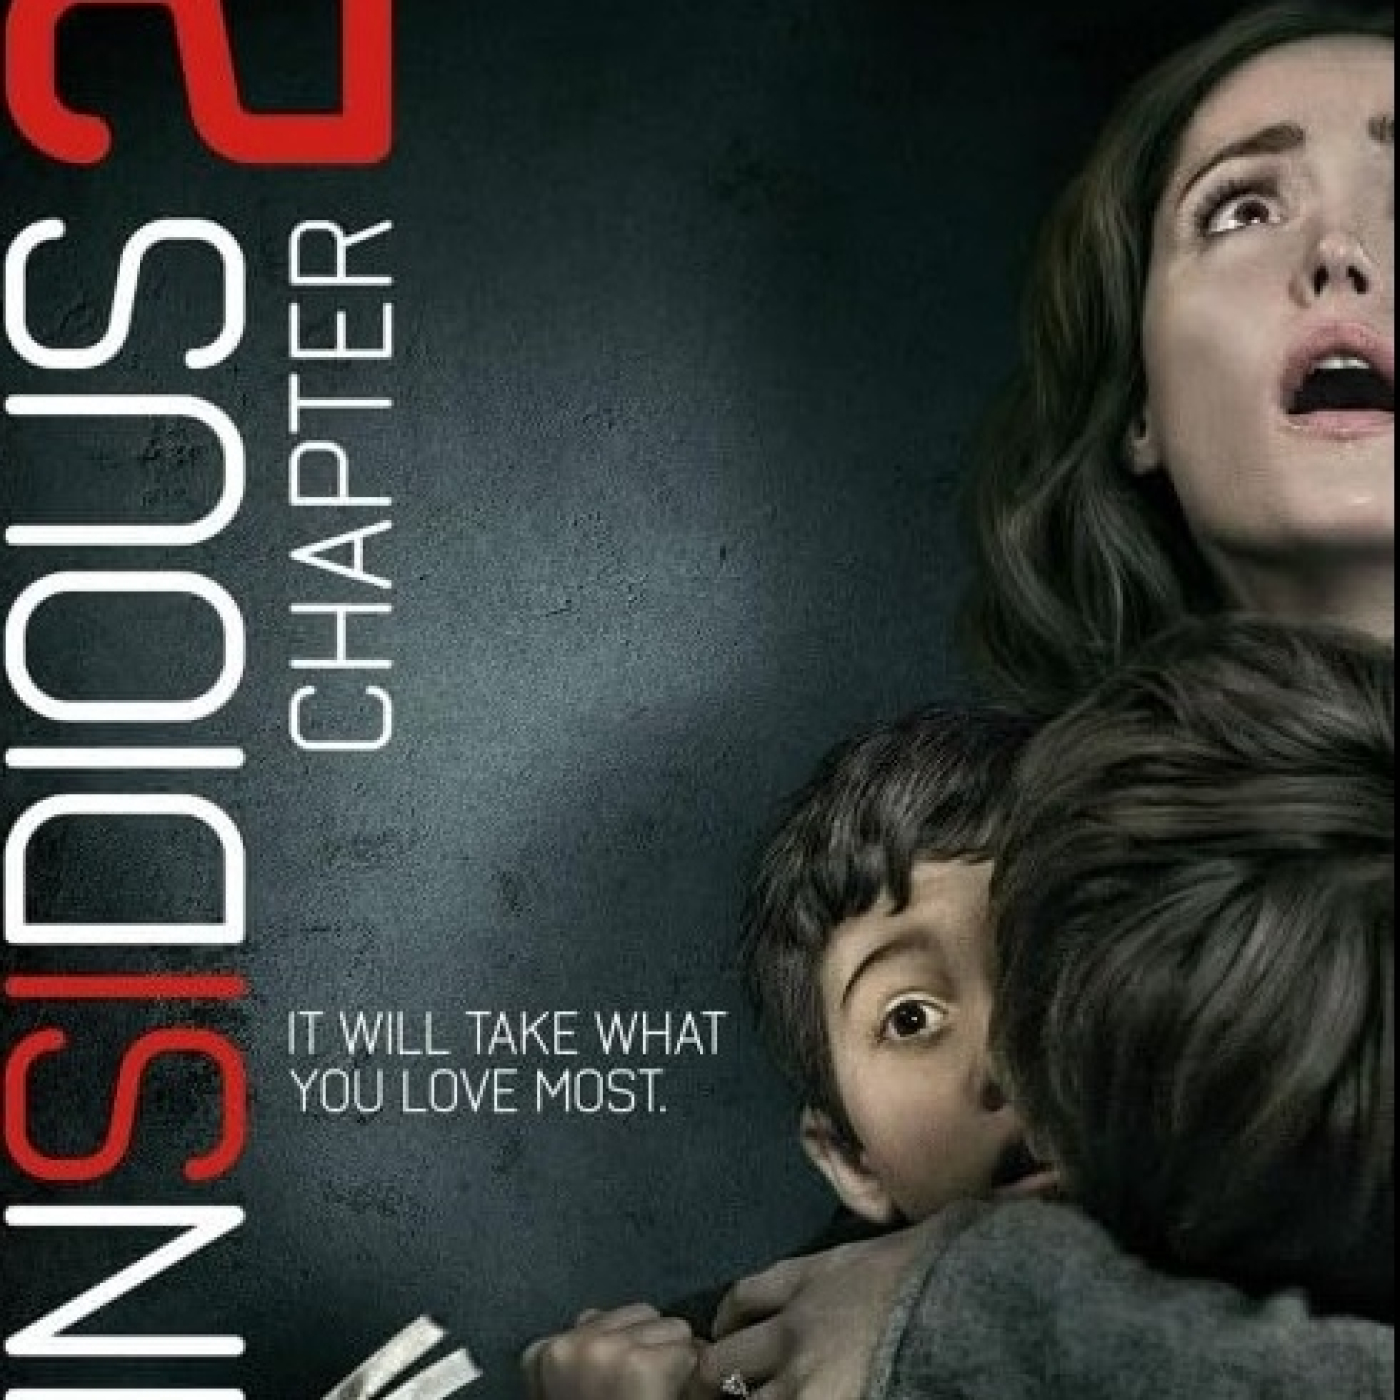 Movies Requests - Insidious: Chapter 2 - 2013